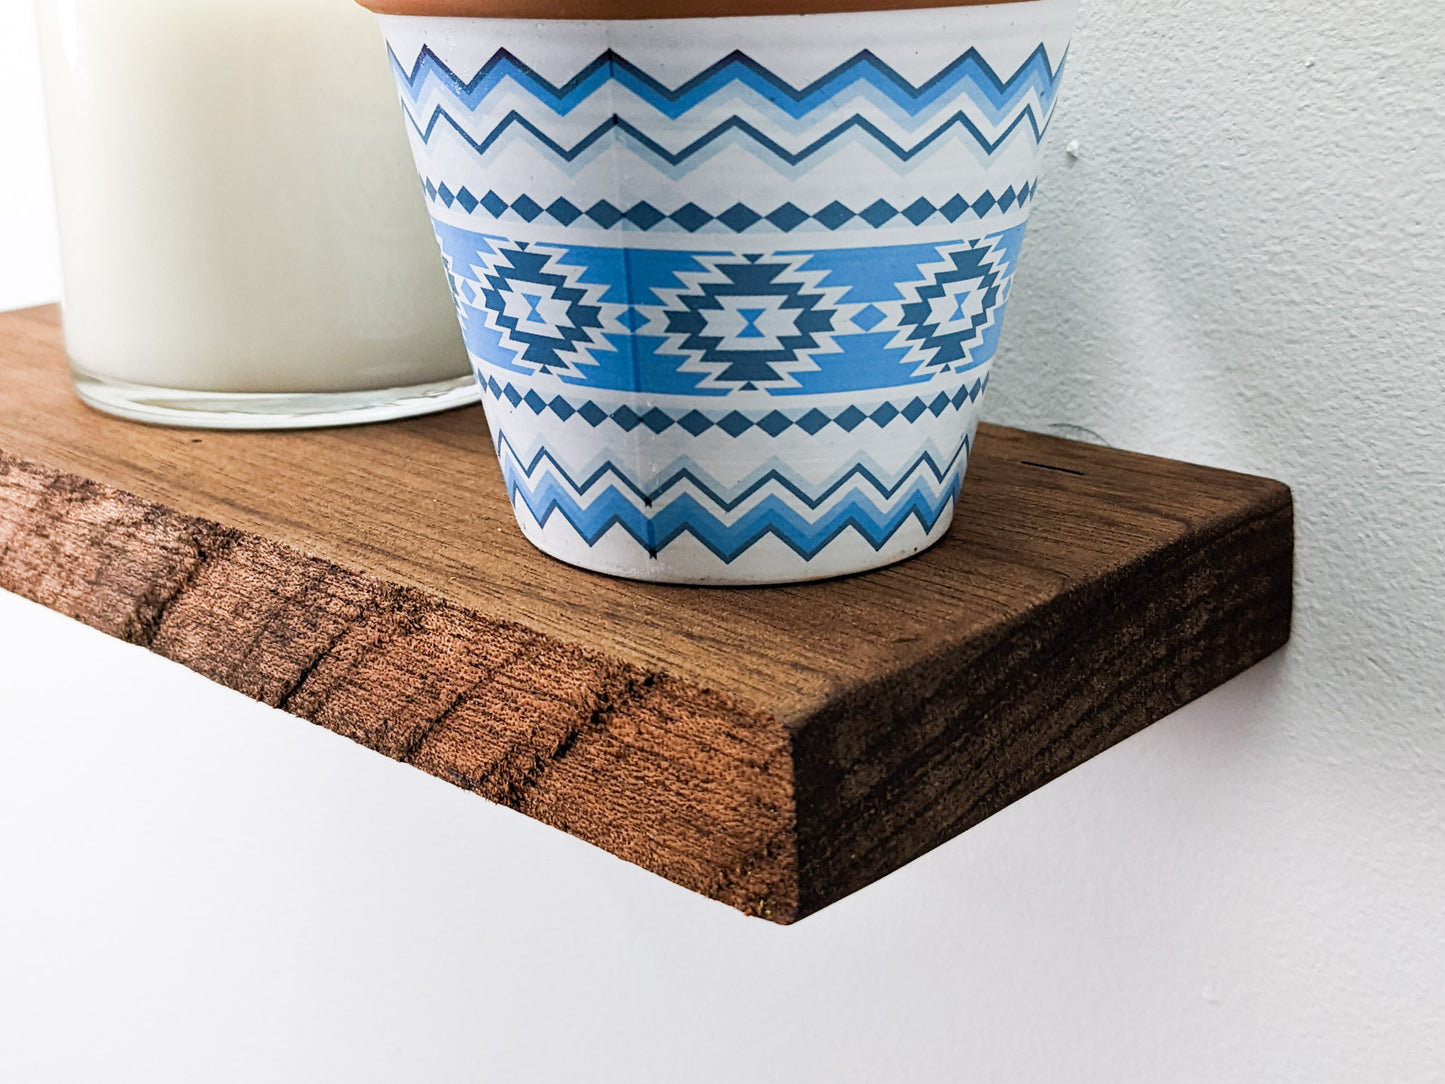 A medium mahogany live edge floating wall shelf is wall mounted and holds two planters that are cut off at the top of the picture. The far left planter is pure white and the planter to the right is white and blue. 